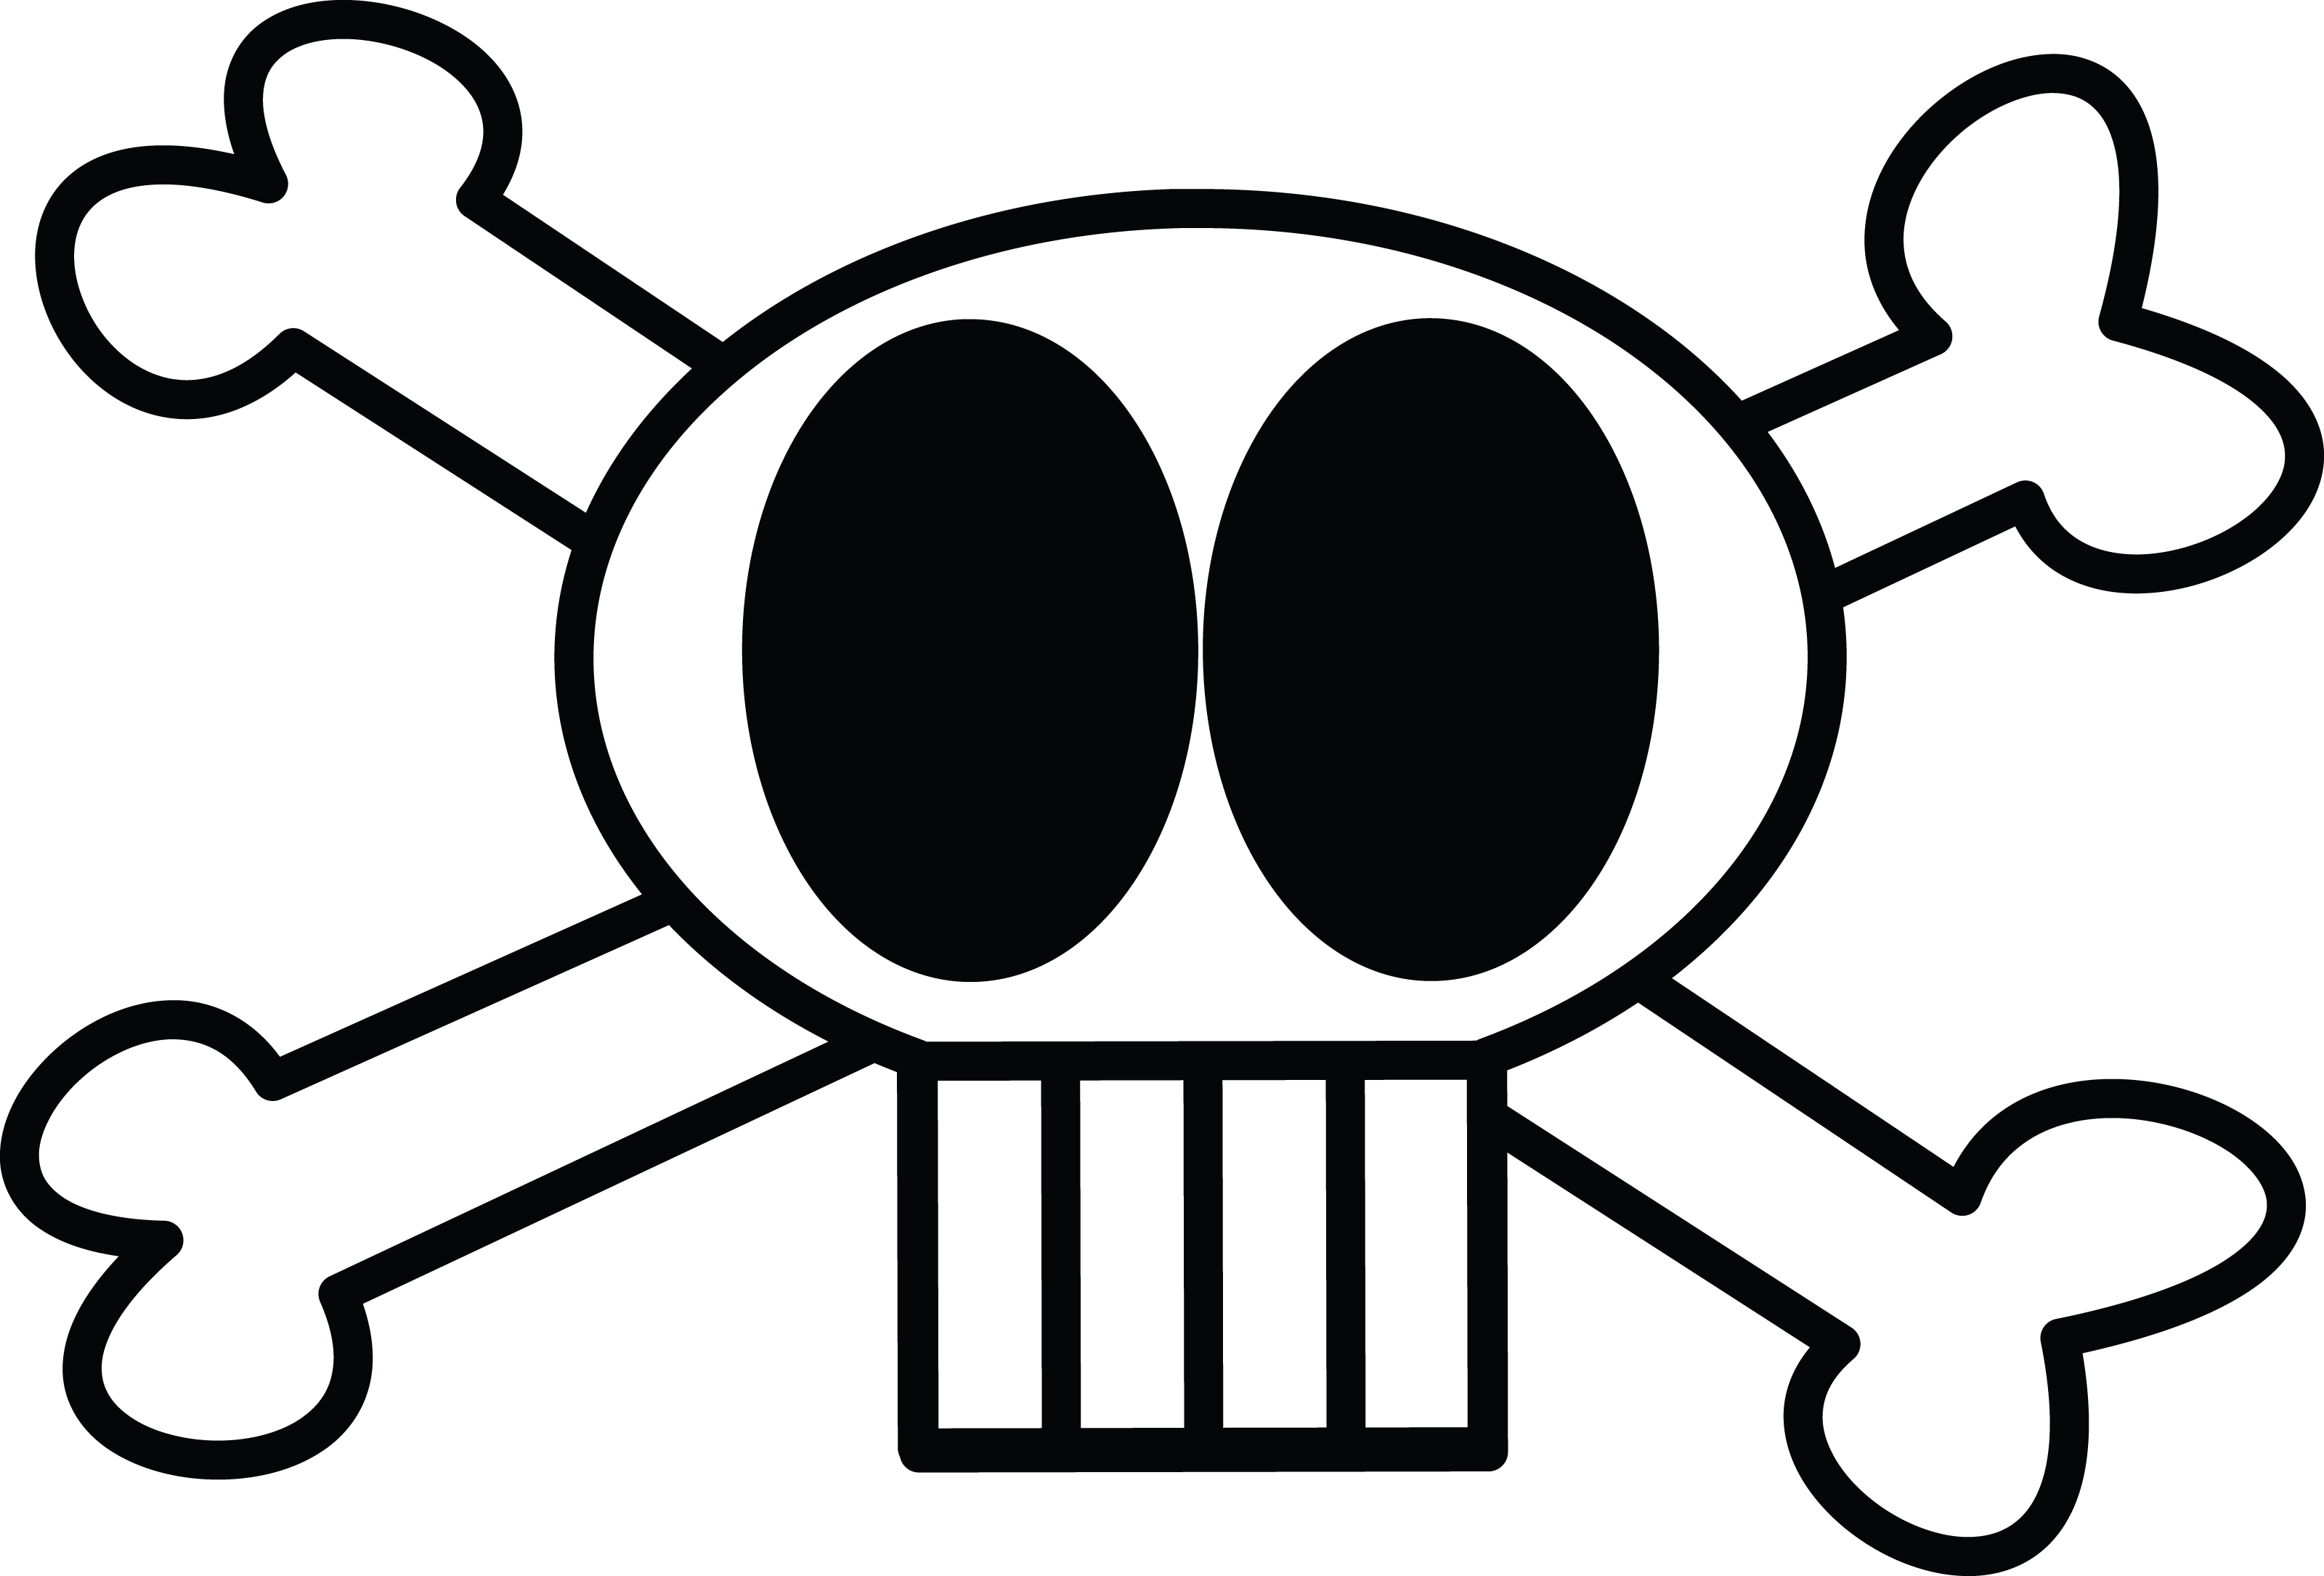 1000+ images about skull and bones | Cartoon and Clip art